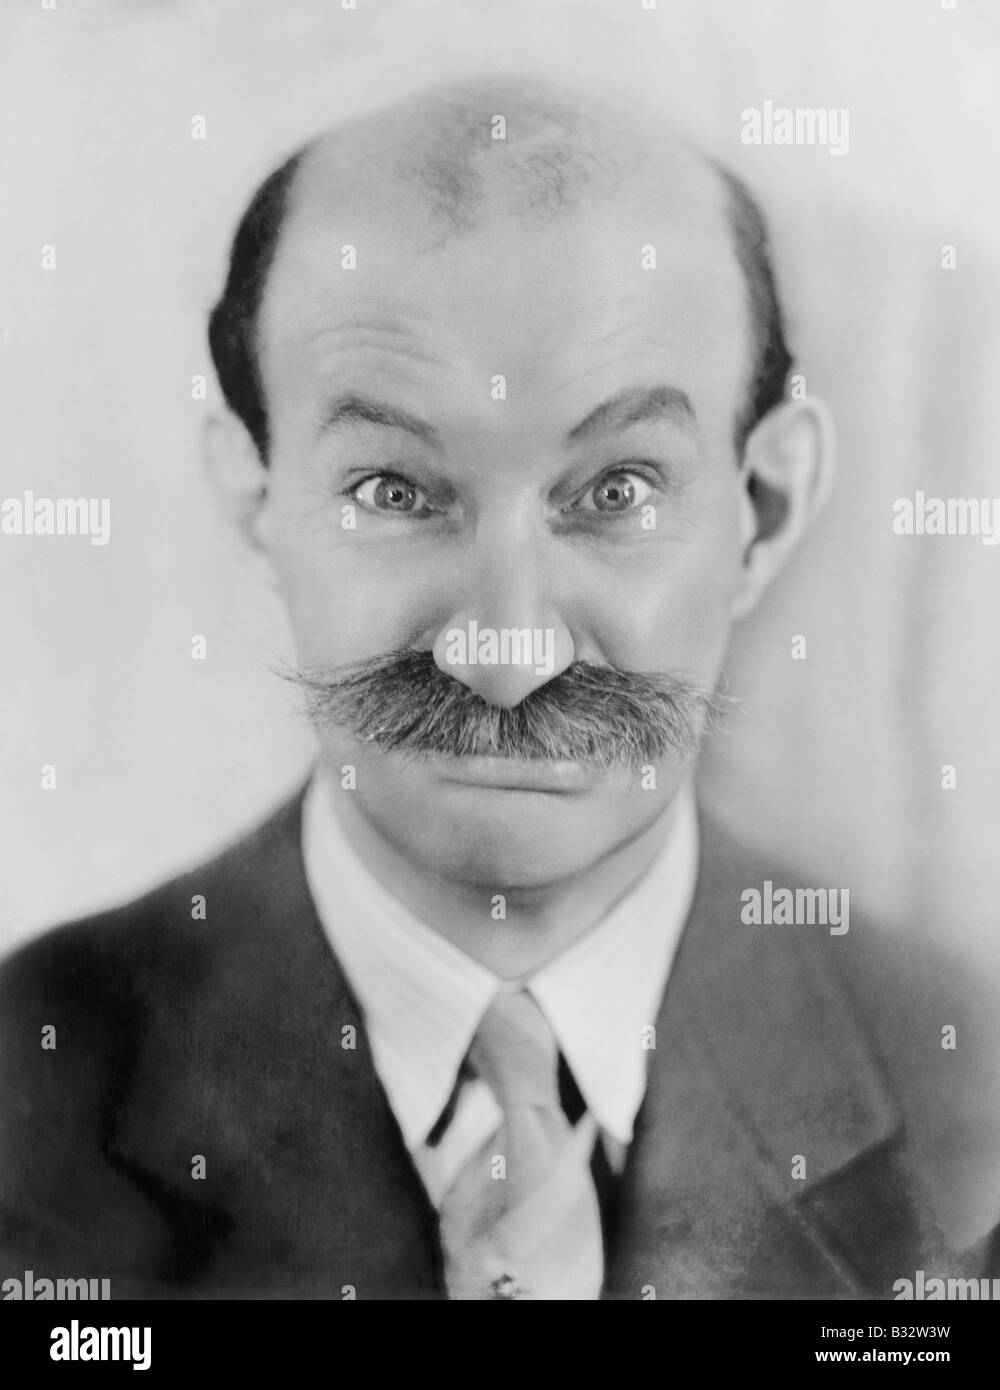 Man with mustache making a funny face Stock Photo